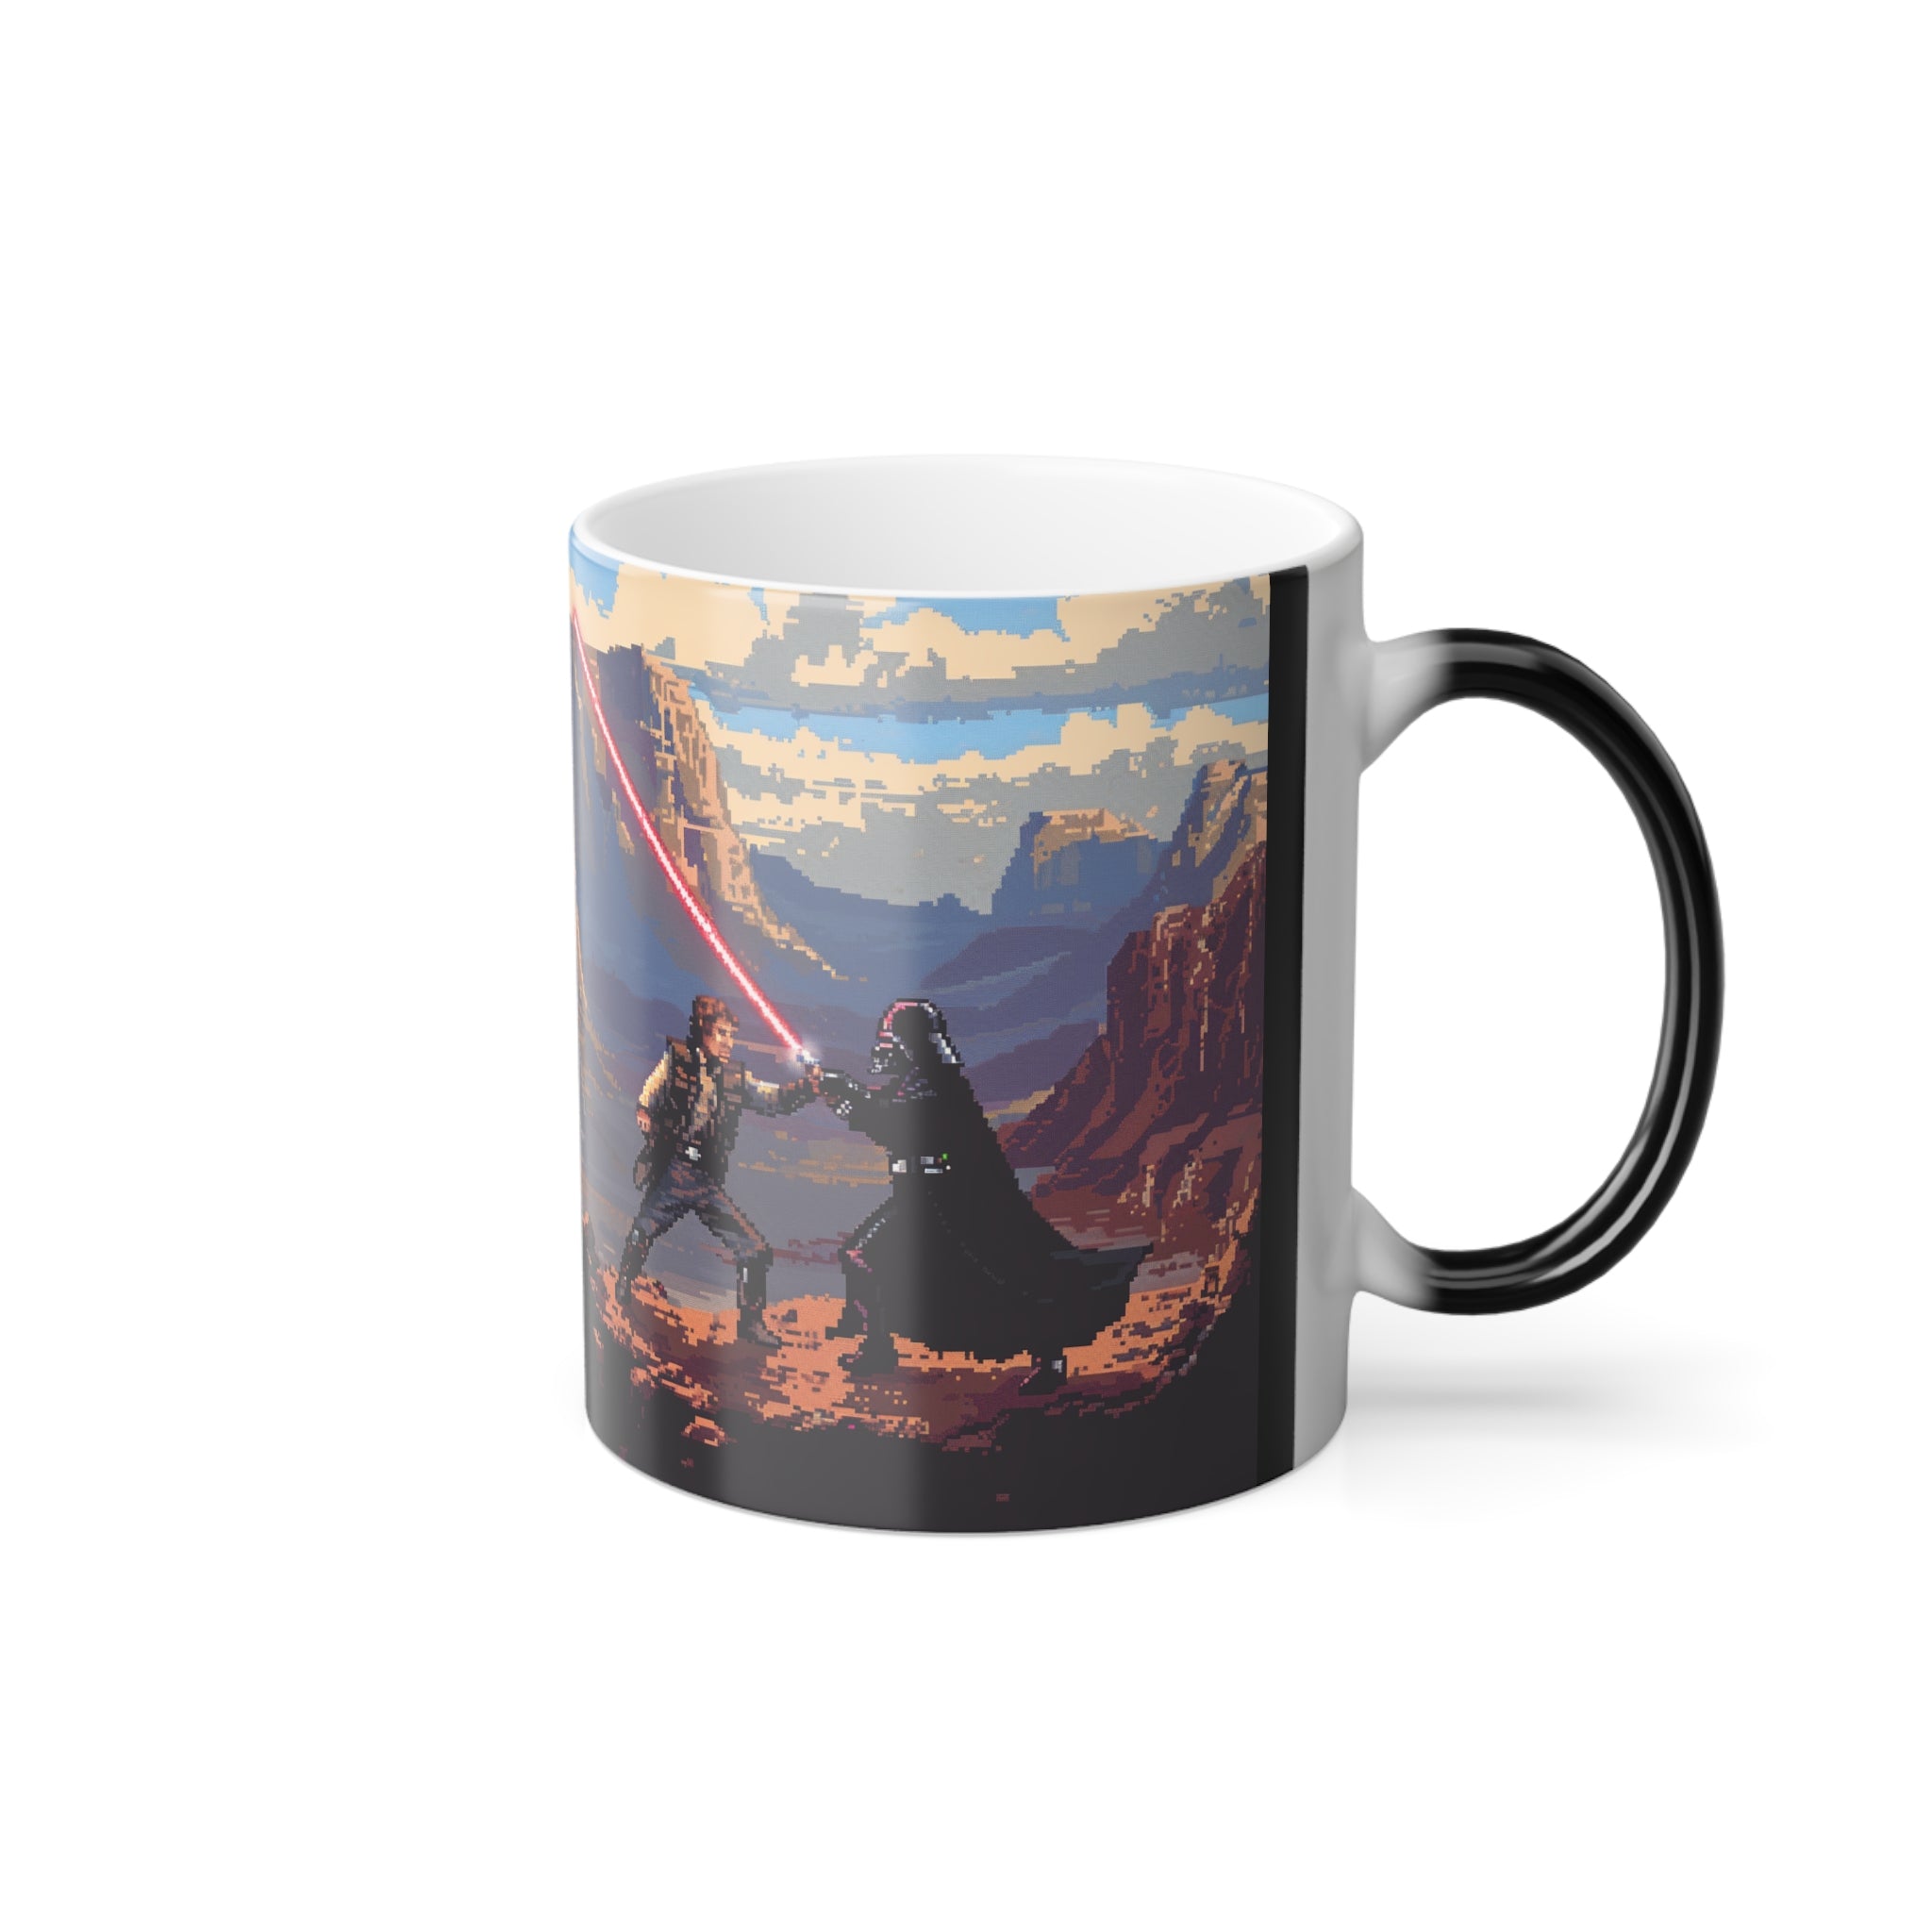 The image captures the mesmerizing transformation of the color morphing mug, starting as a sleek, mysterious black mug. As it heats up, it reveals a vivid, detailed 16-bit scene featuring Han in a daring battle against the Dark Lord, showcasing the dynamic change and the thrilling world encapsulated in this unique drinkware.